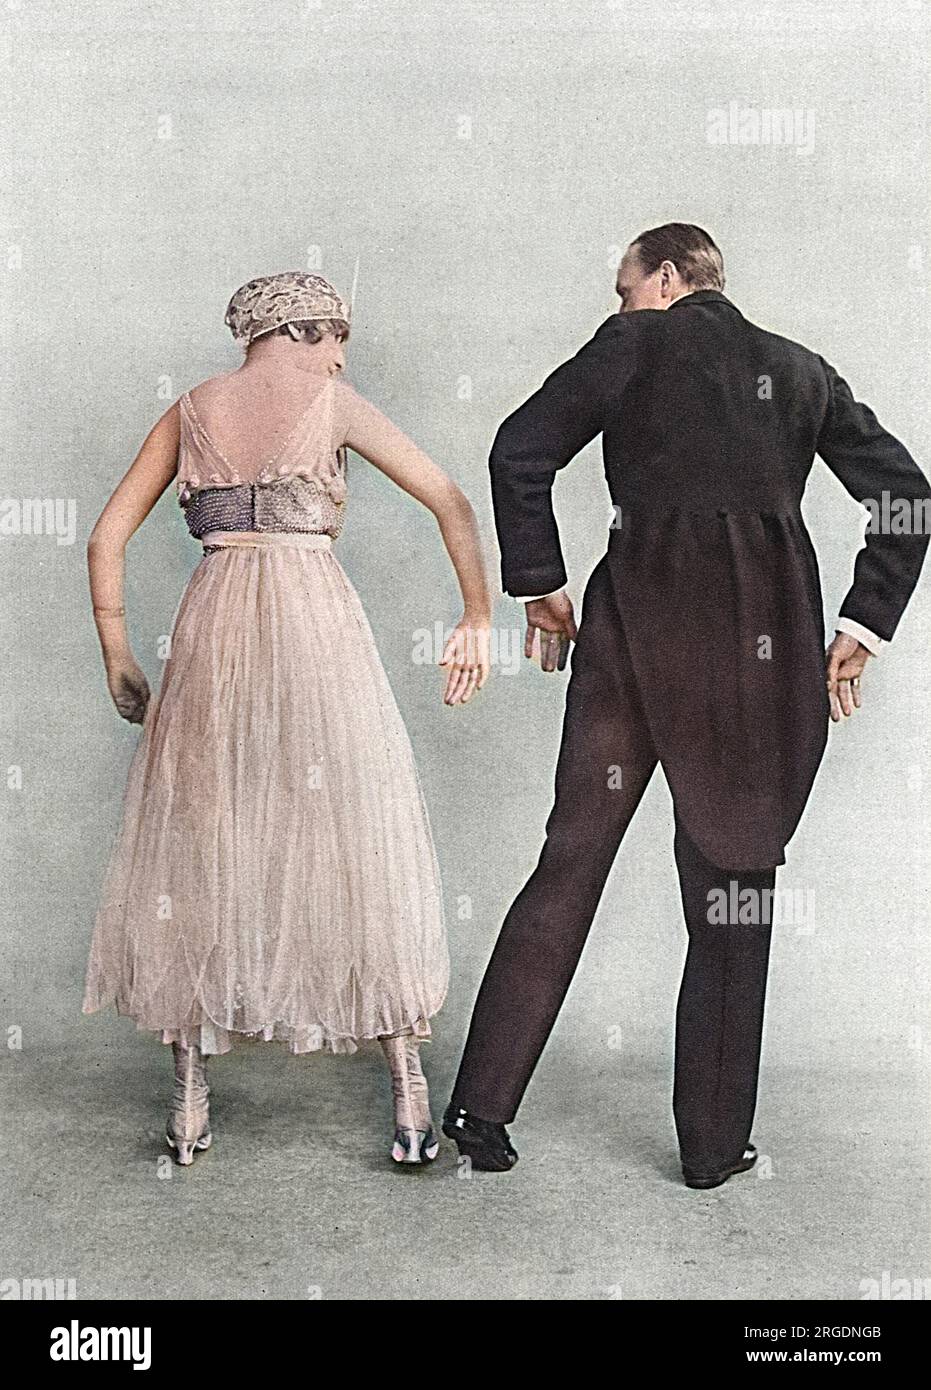 The Pigeon Walk, a new dance demonstrated by Peggy Kurton and George Grossmith in Tonight's the Night at the Gaiety Theatre in 1915.  The Pigeon Walk joined other popular animal-themed dance crazes such as the Grizzly Bear, the Bunny Hug and the Turkey Trot during the Great War period. Stock Photo